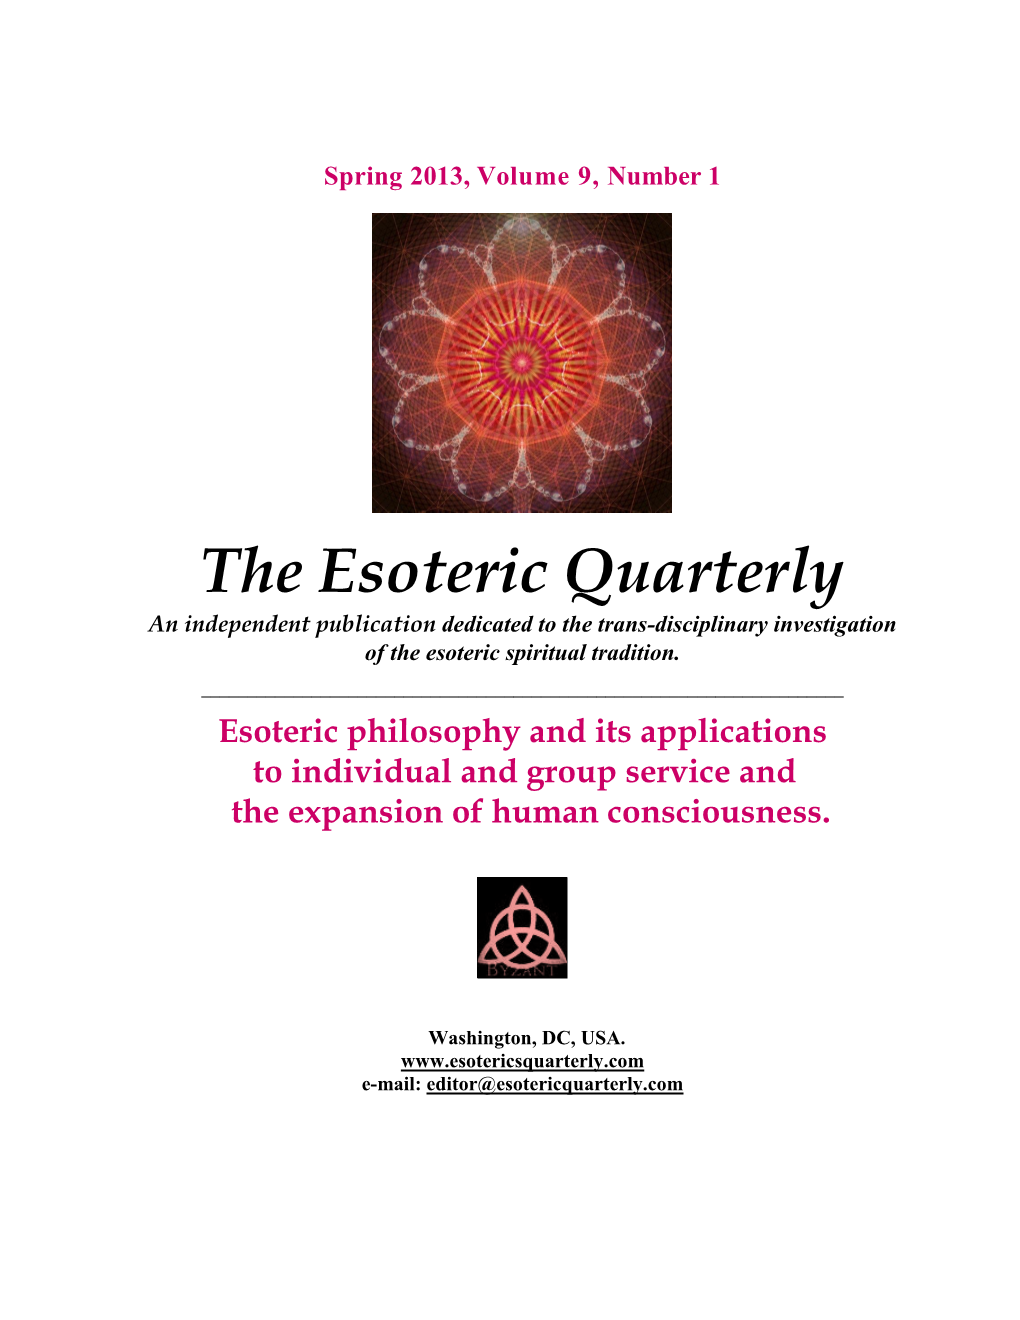 Spring 2013, Volume 9, Number 1 the Esoteric